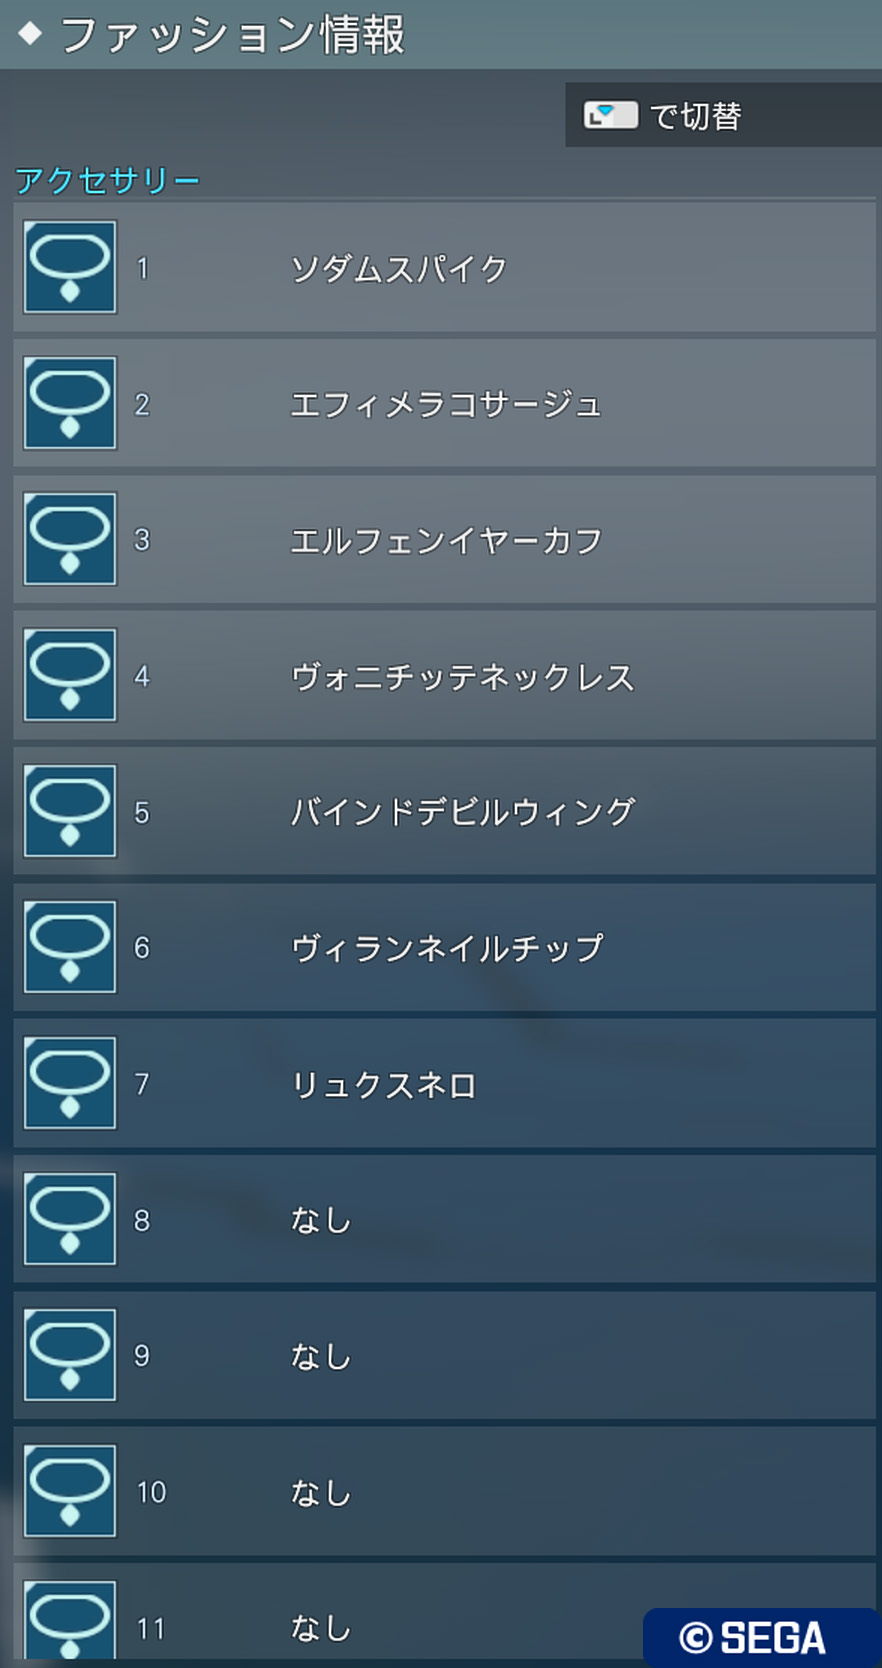 PSO2NGS：男の娘系SS・11.1－2023 - PHANTASY STAR ONLINE 2 